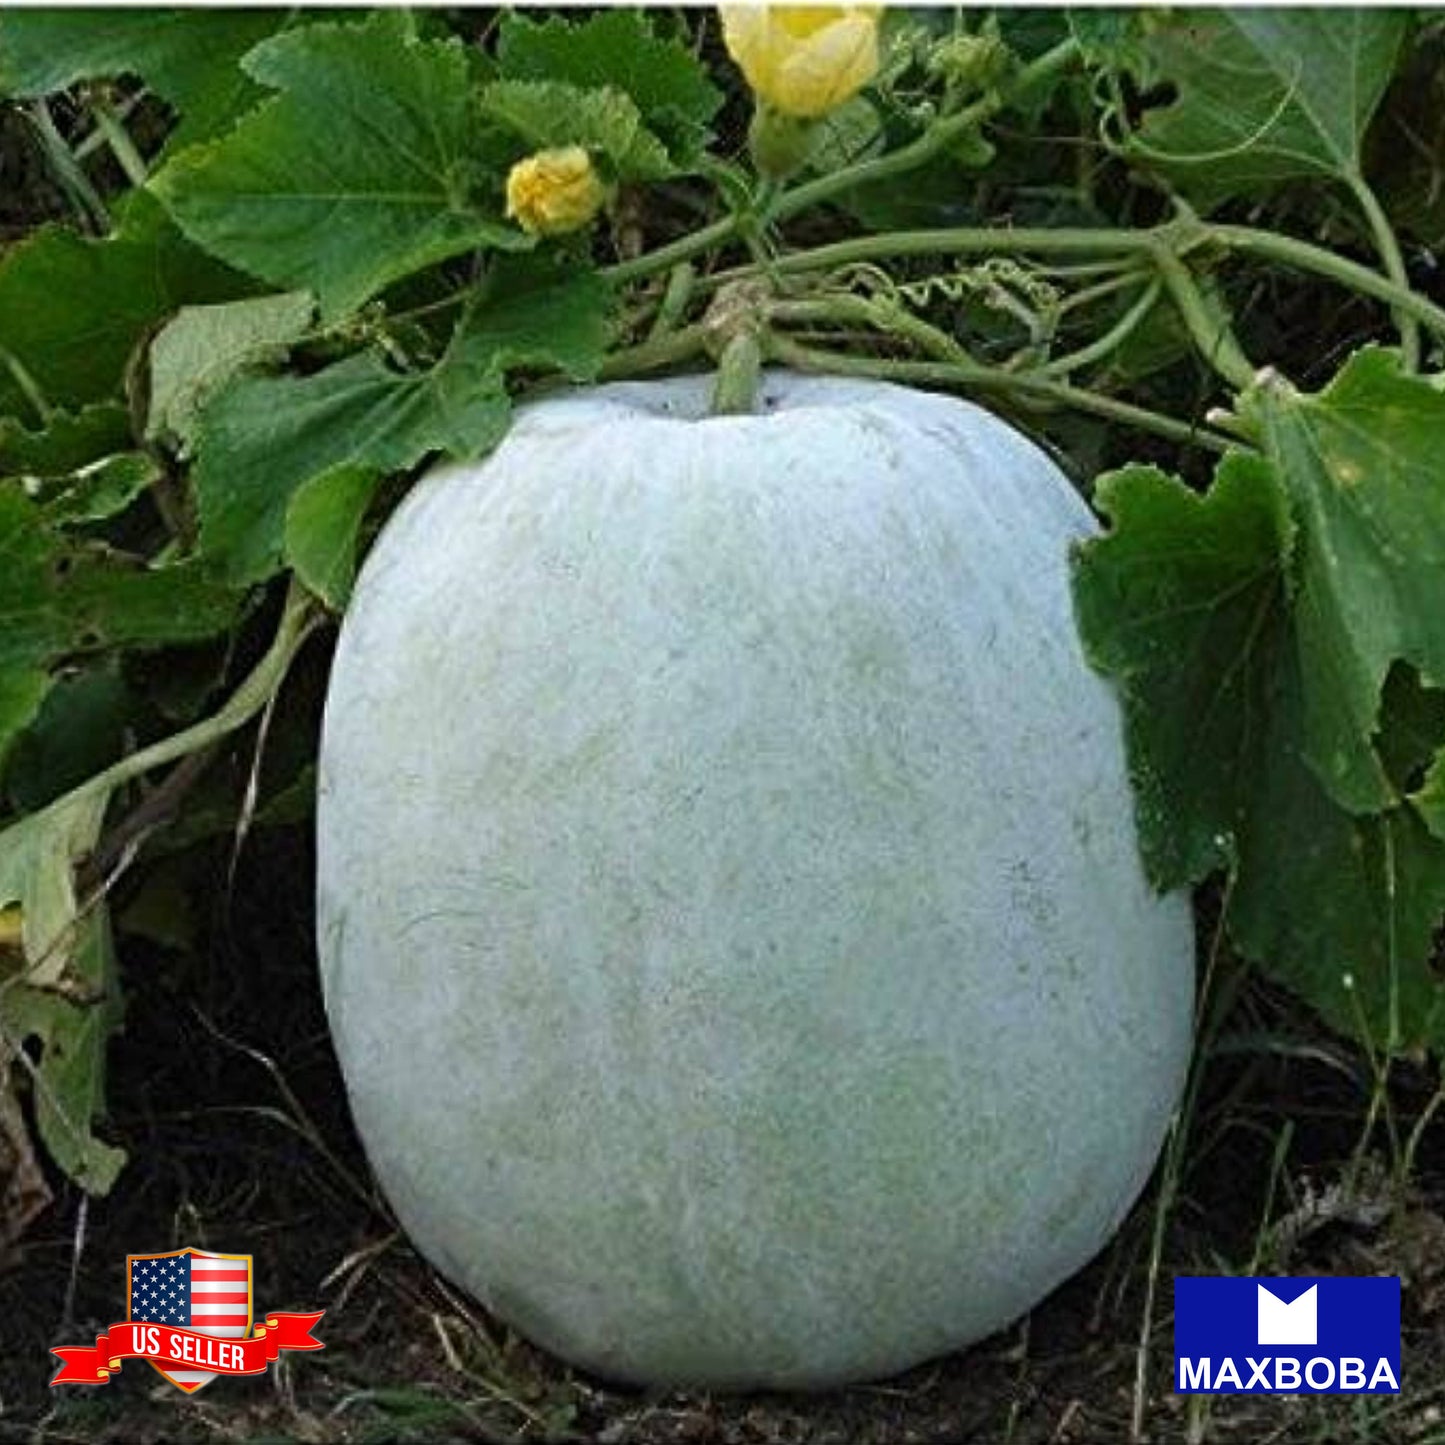 Gourd Giant Wax Seeds Heirloom Vegetable Non-GMO